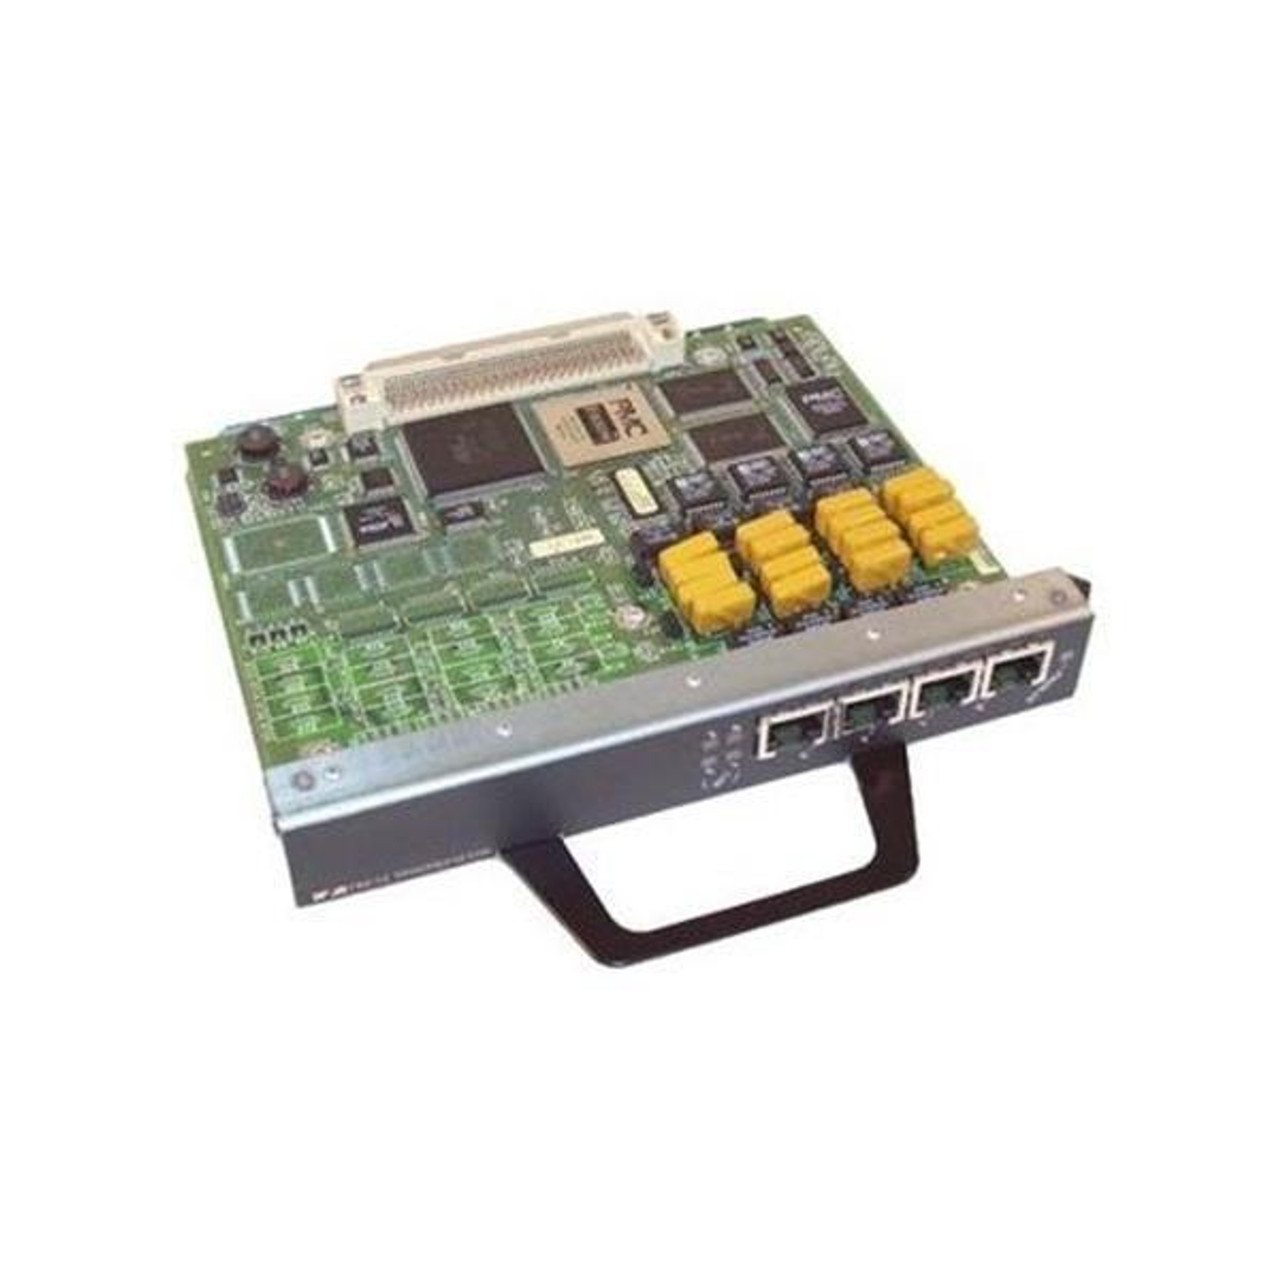 PA-MC-4T1 Cisco Expansion Module WAN 1.5Mbps 4port multichannel T1 port Adapter with integrated CSU DSUs (Refurbished)